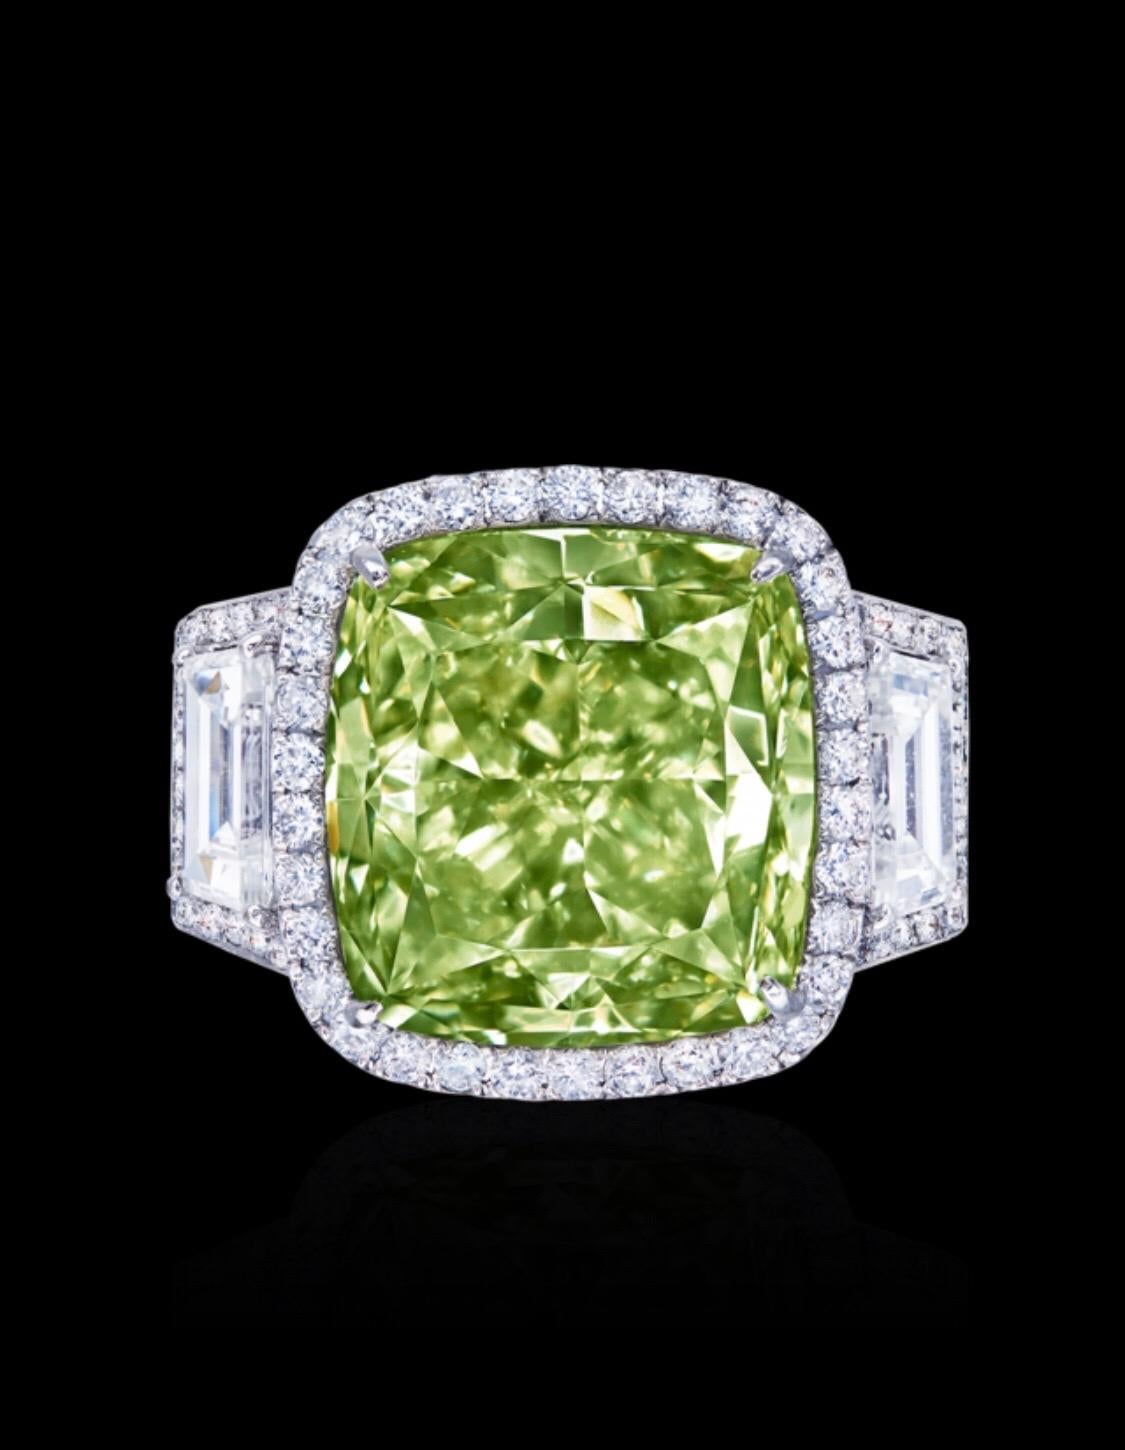 Showcasing a very special certified 12 carat clean natural yellow green diamond ring certified by GIA. Because Green is the last word on the certificate that makes it the primary color and yellow just a slight overtone. Green diamonds are very rare,